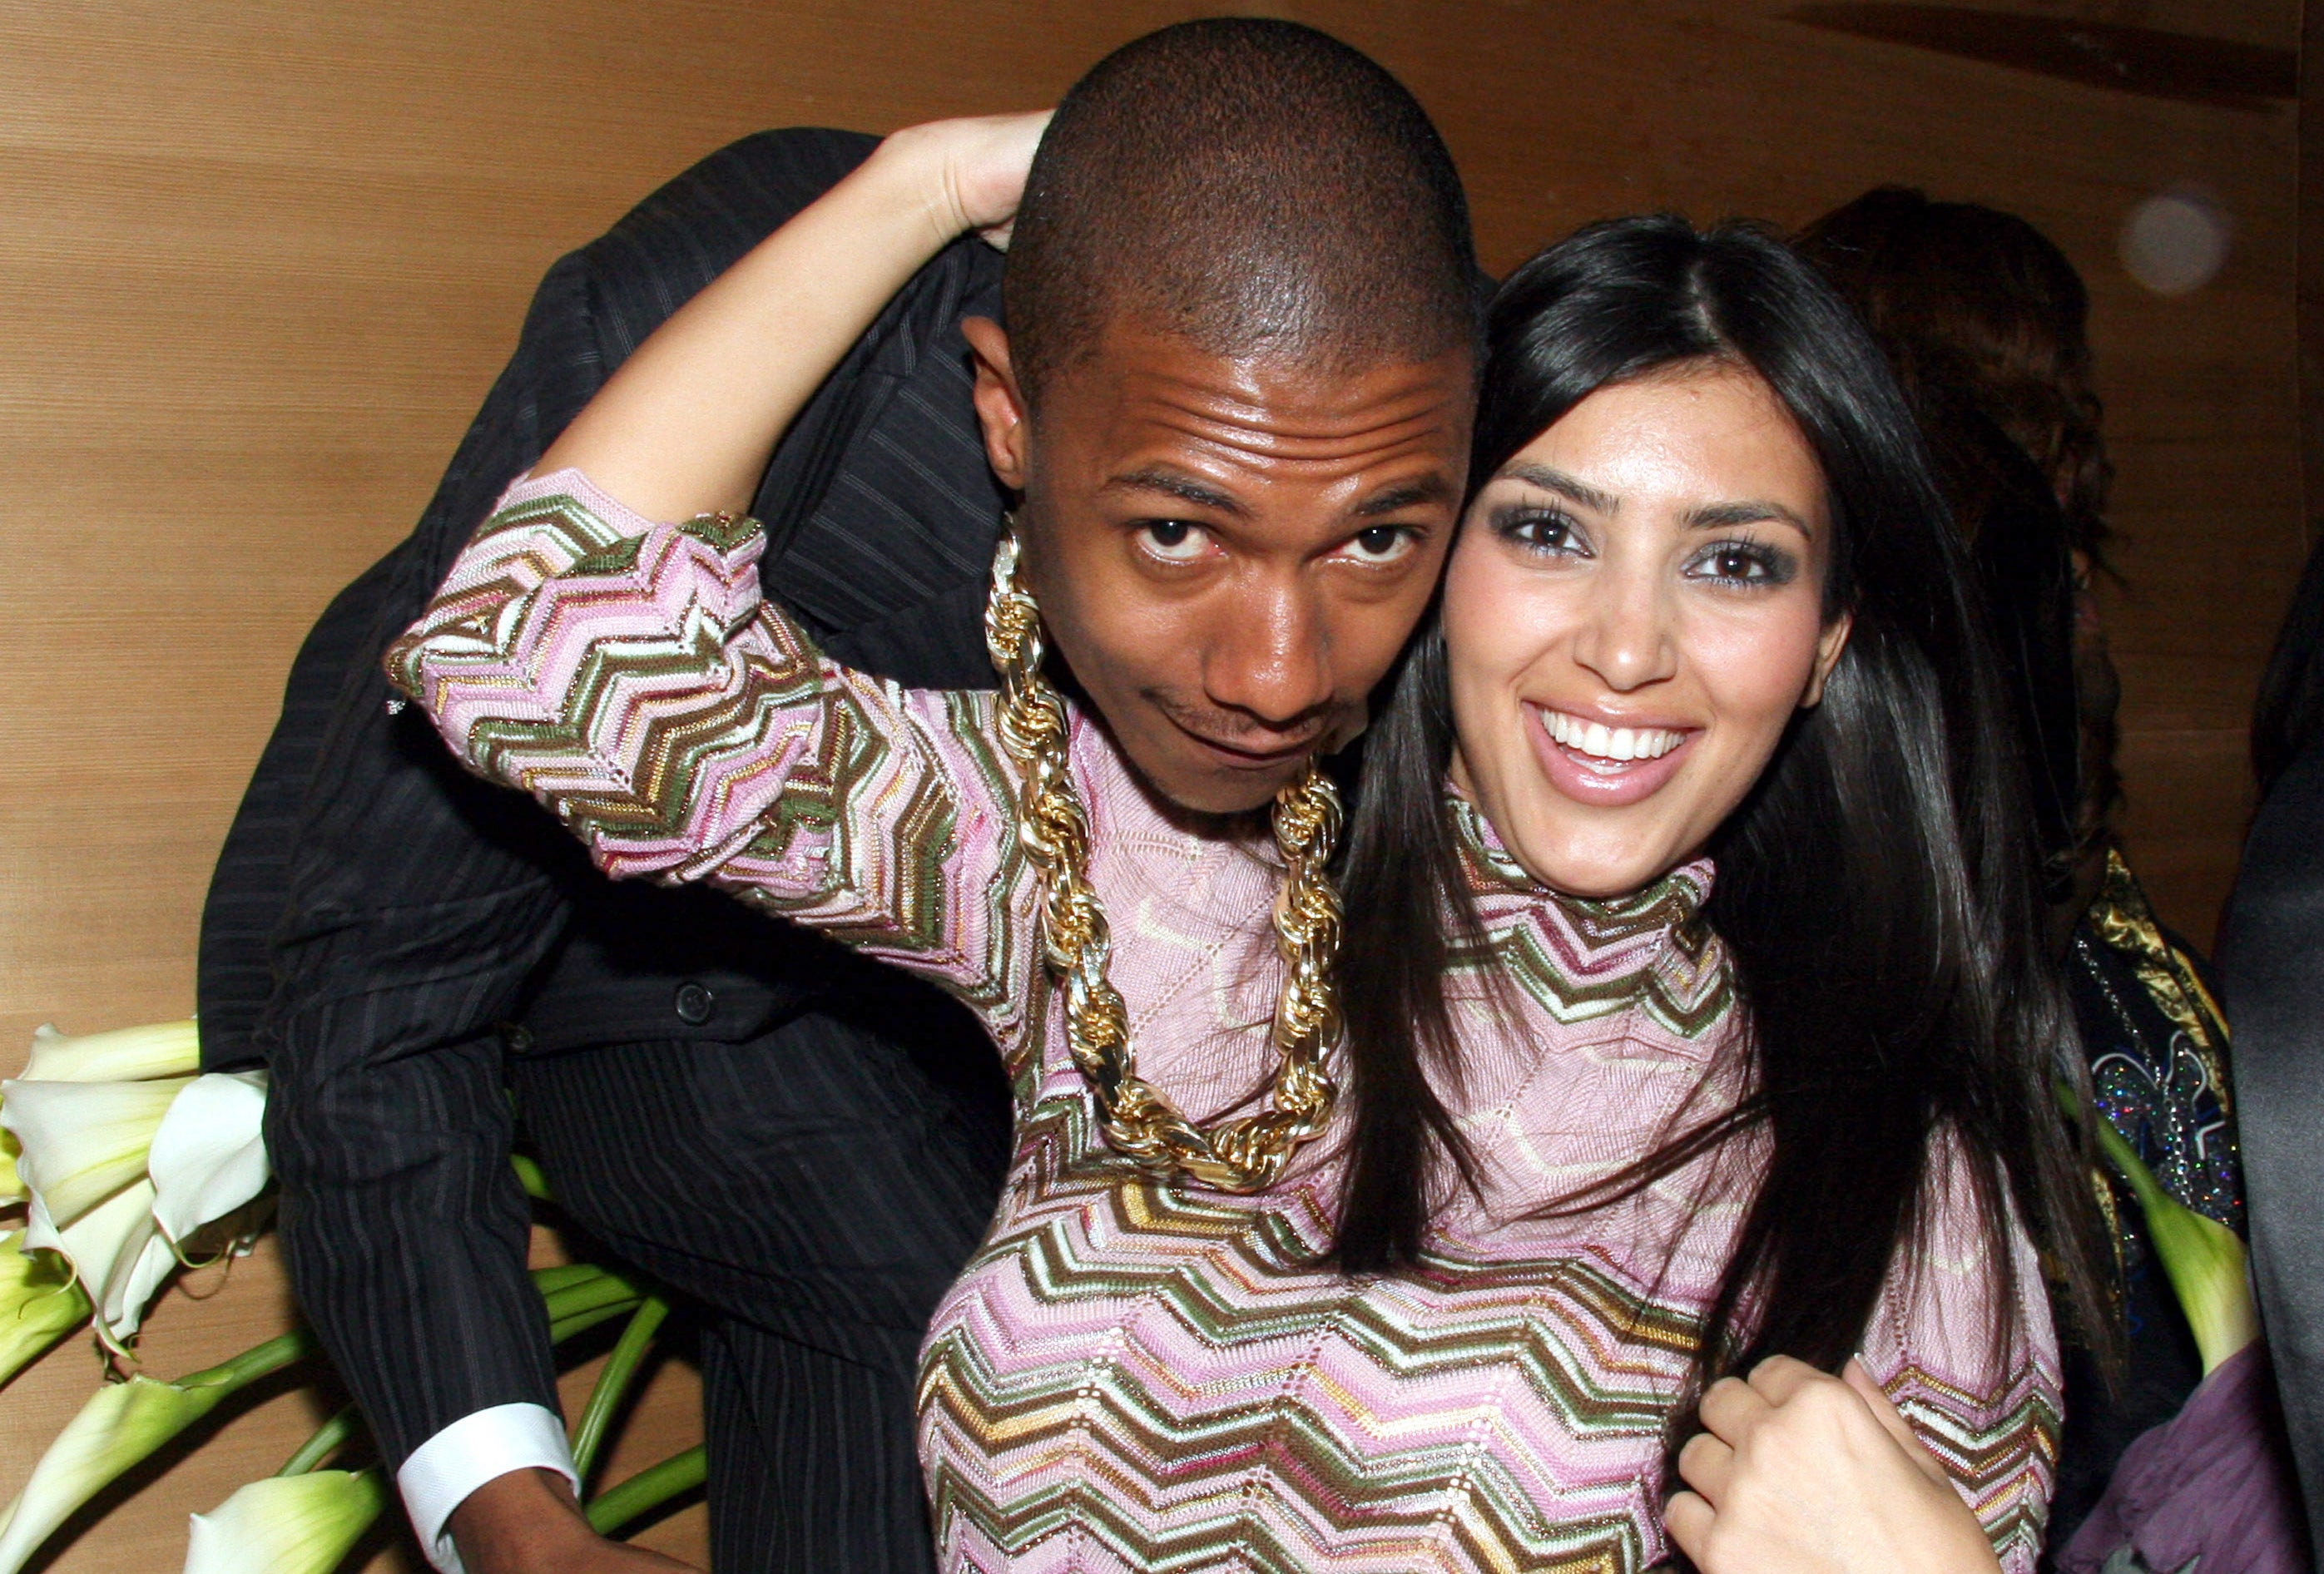 Nick Cannon and Kim Kardashian posing for a picture together